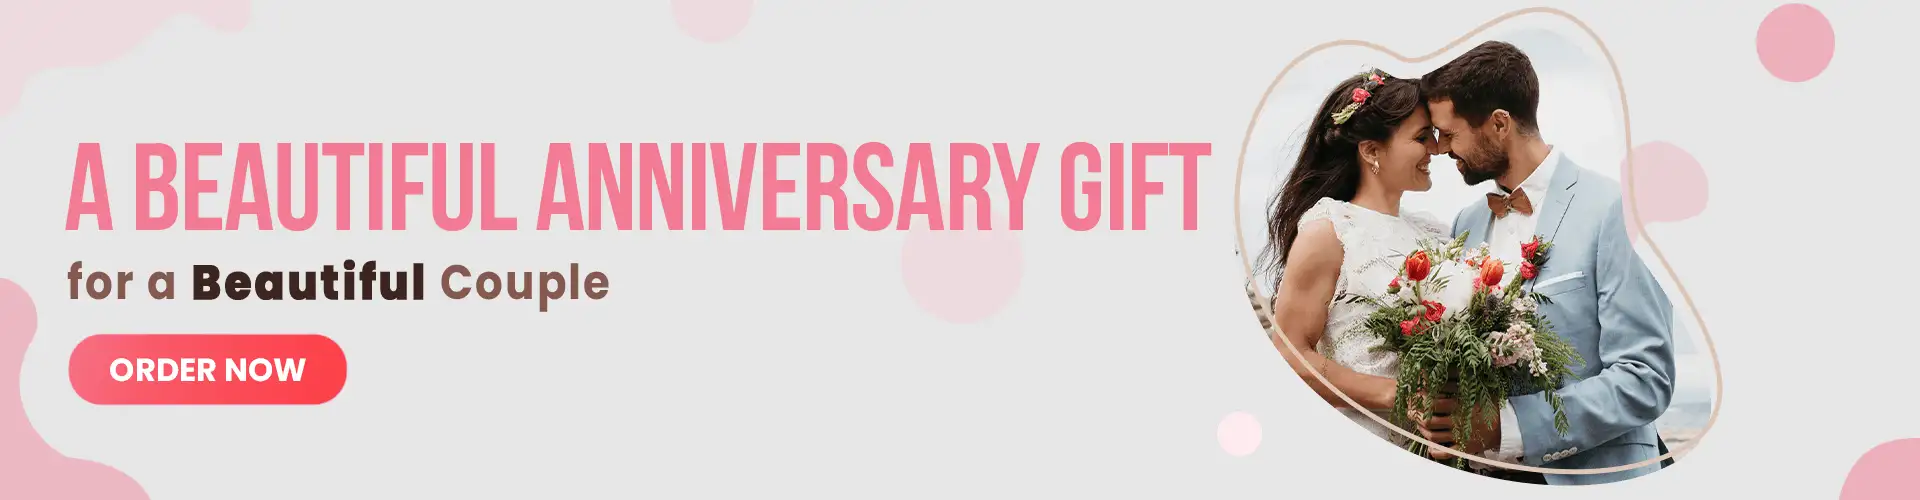 Anniversary Gifts Online